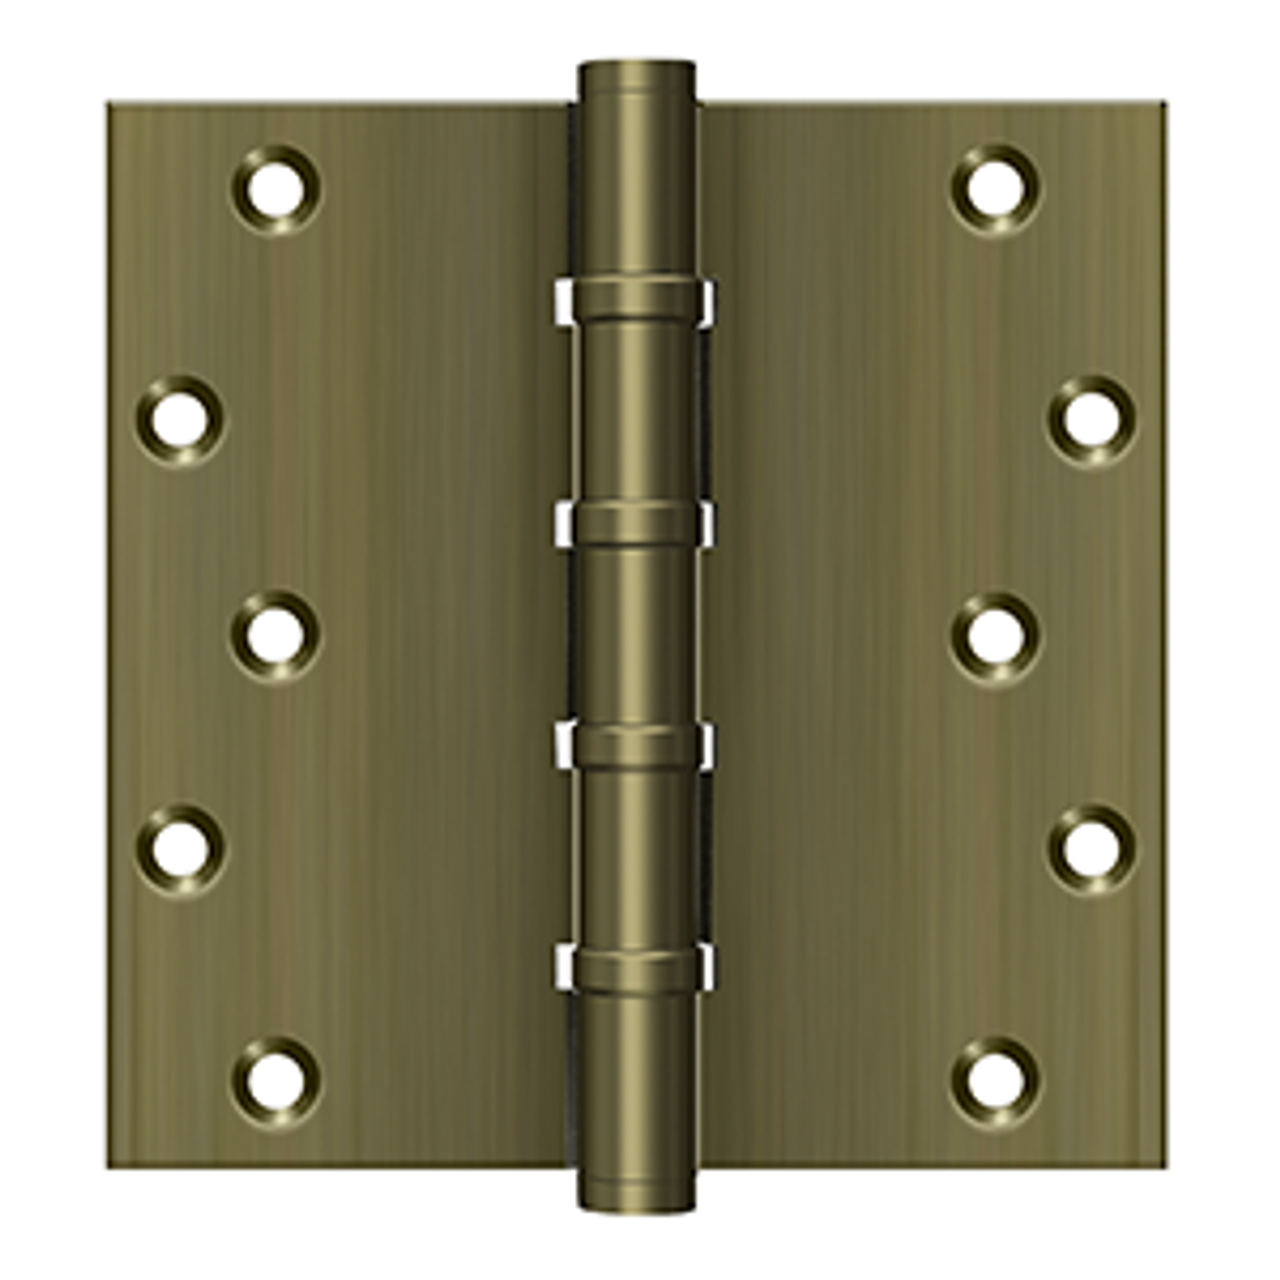 Deltana DSB66BB SERIES 6" X 6" SQUARE HINGES, BALL BEARINGS, SOLID BRASS